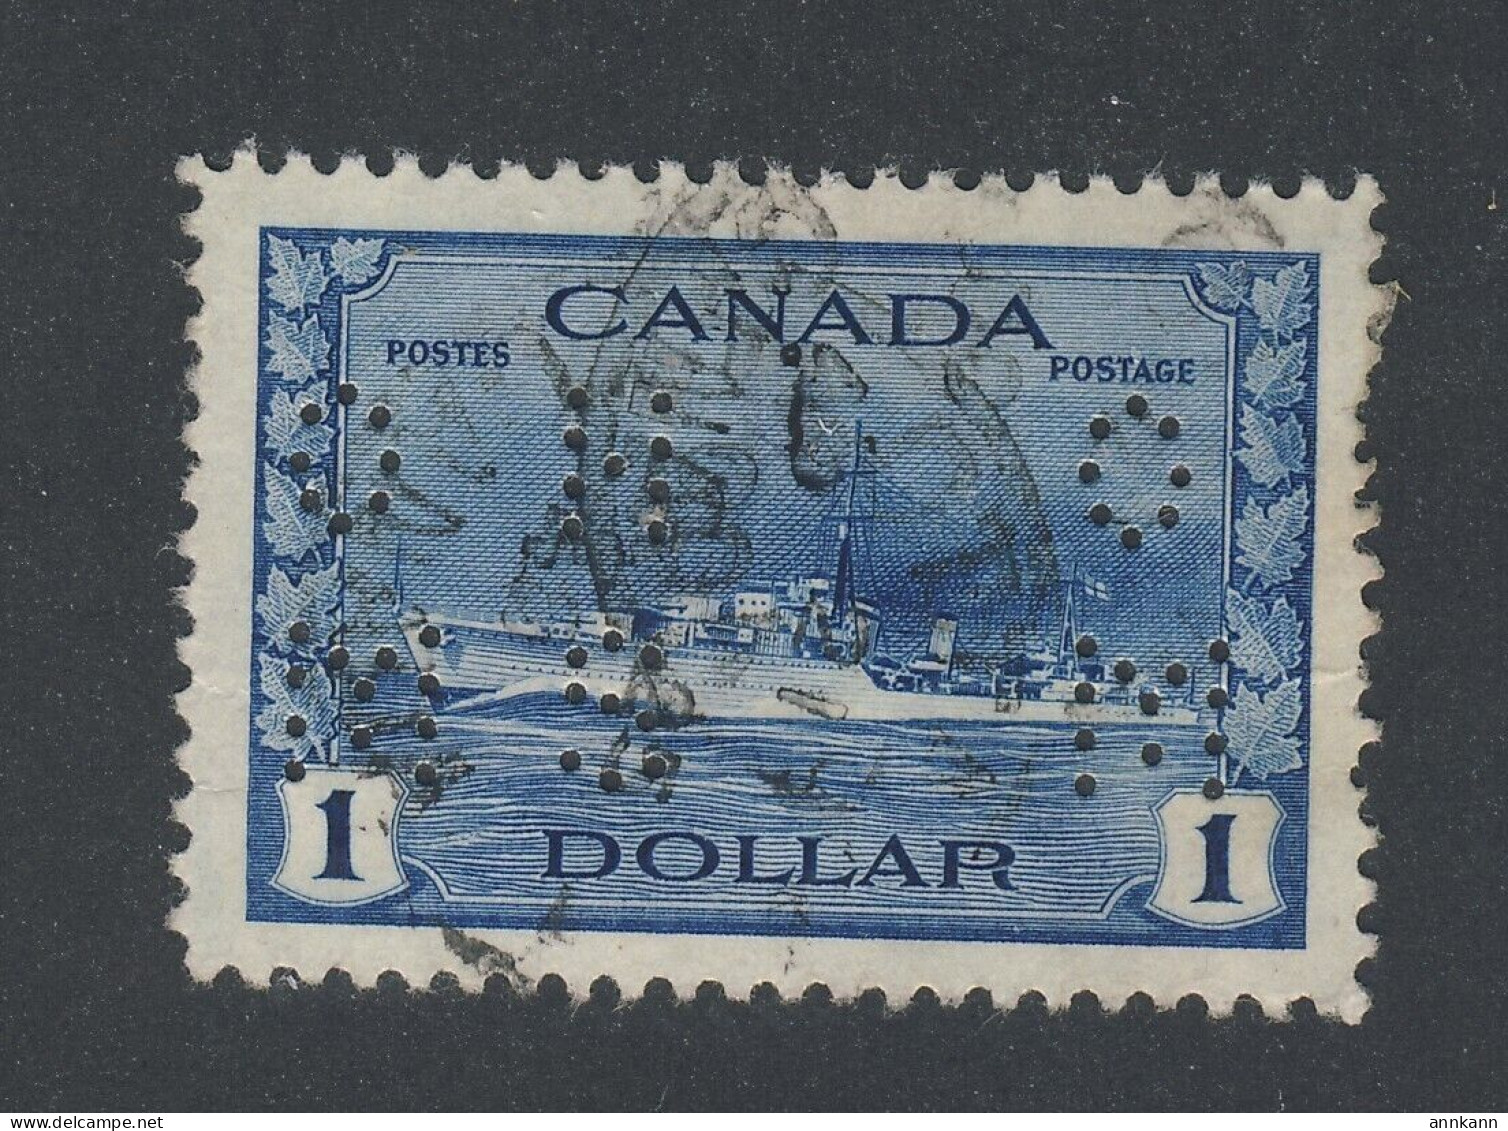 Canada OHMS Perf-in Stamp; #O262-$1.00 WW2 Battleship Guide Value = $60.00 - Perfin